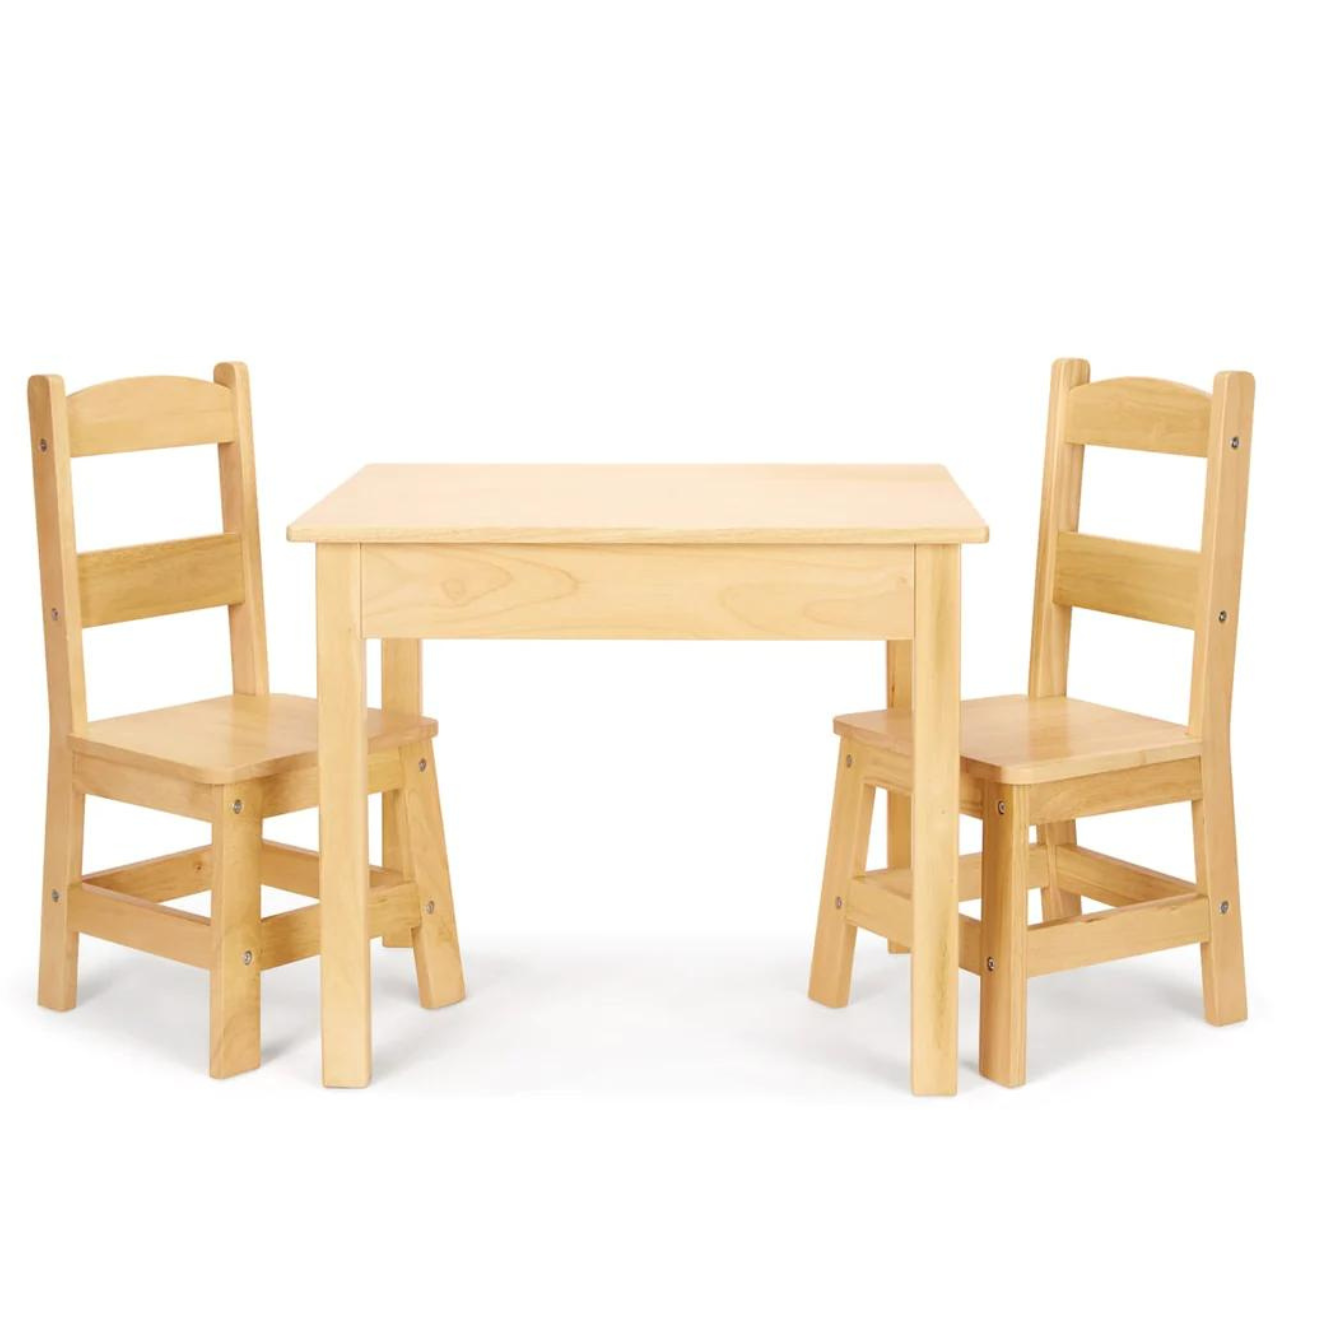 Wooden Table & Chairs - Natural